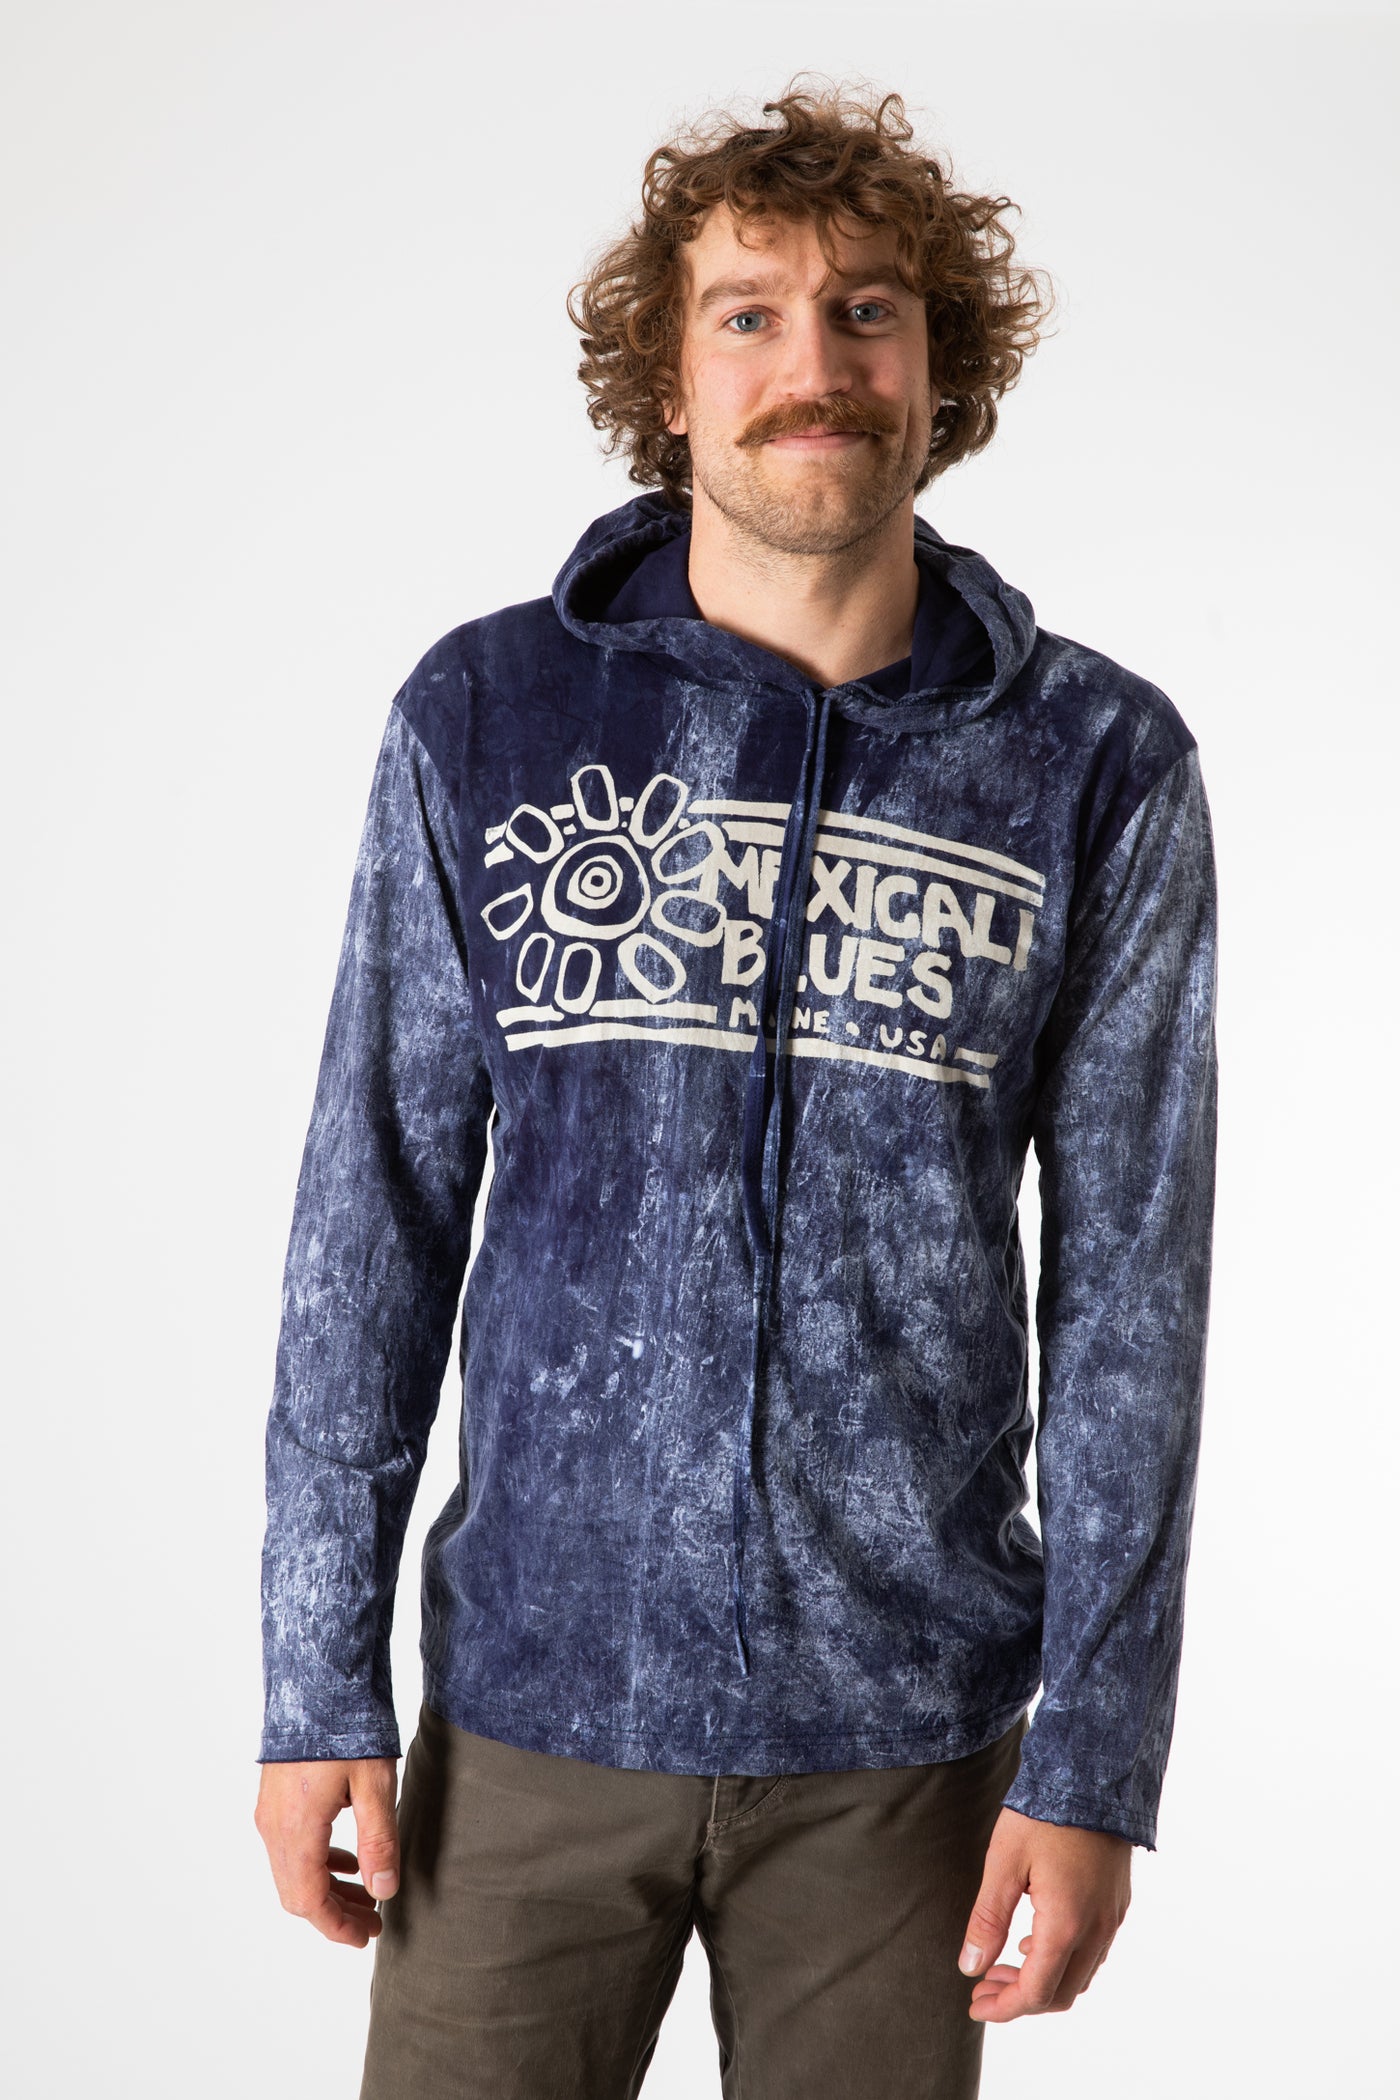 Mexicali Blues Double Take Lightweight Hoodie